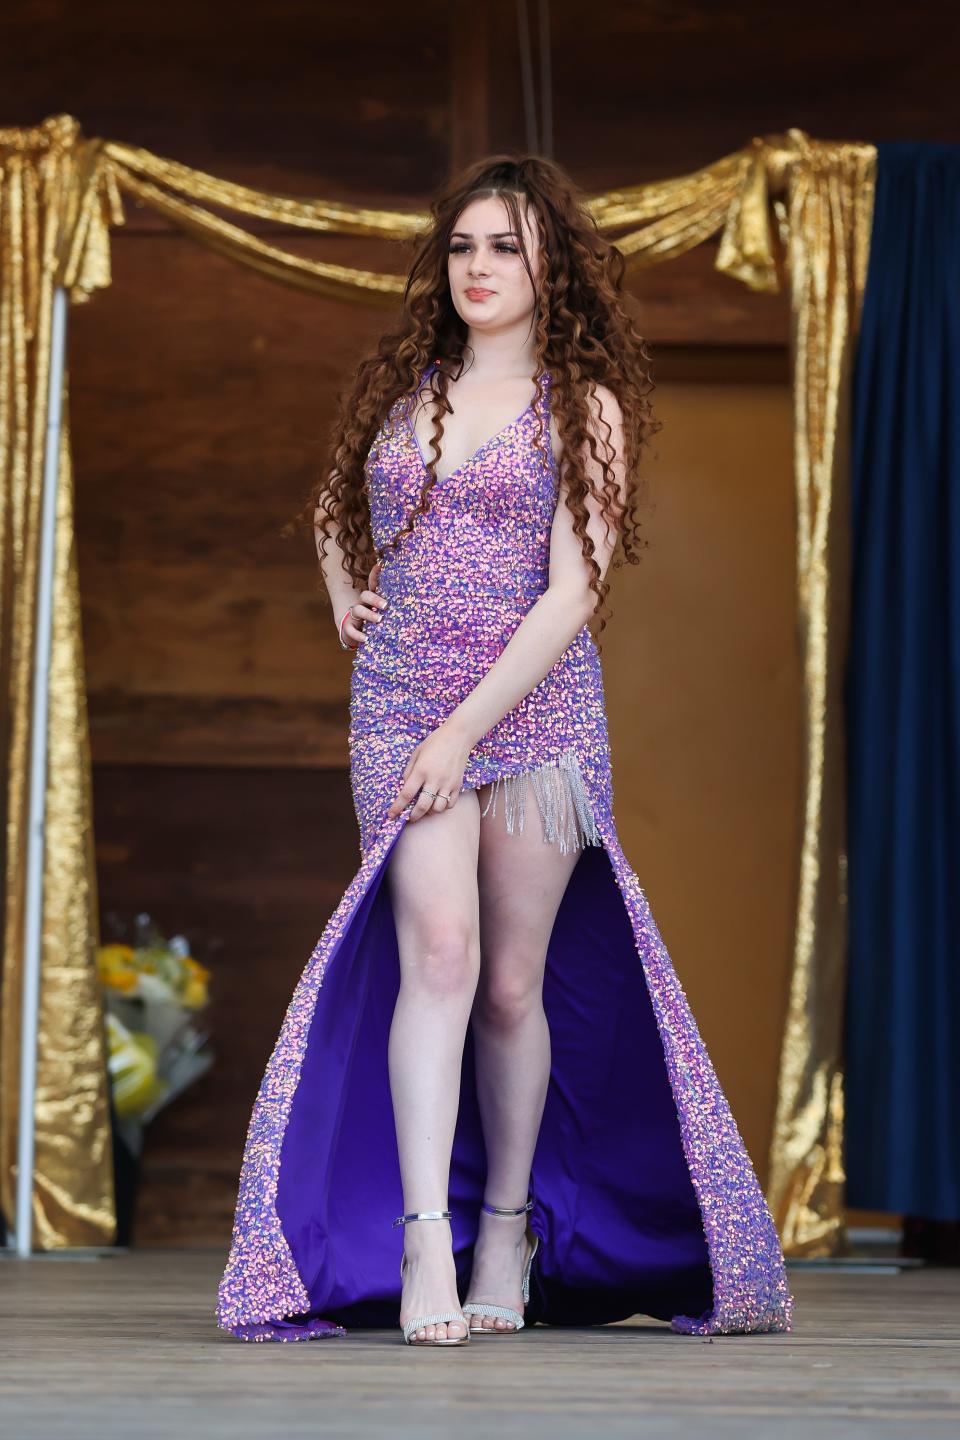 Malania Graichen, 16, of Cranston, Rhode Island, walks on stage wearing a purple sequin dress in the evening gown competition at the 77th Miss Hampton Beach Pageant.